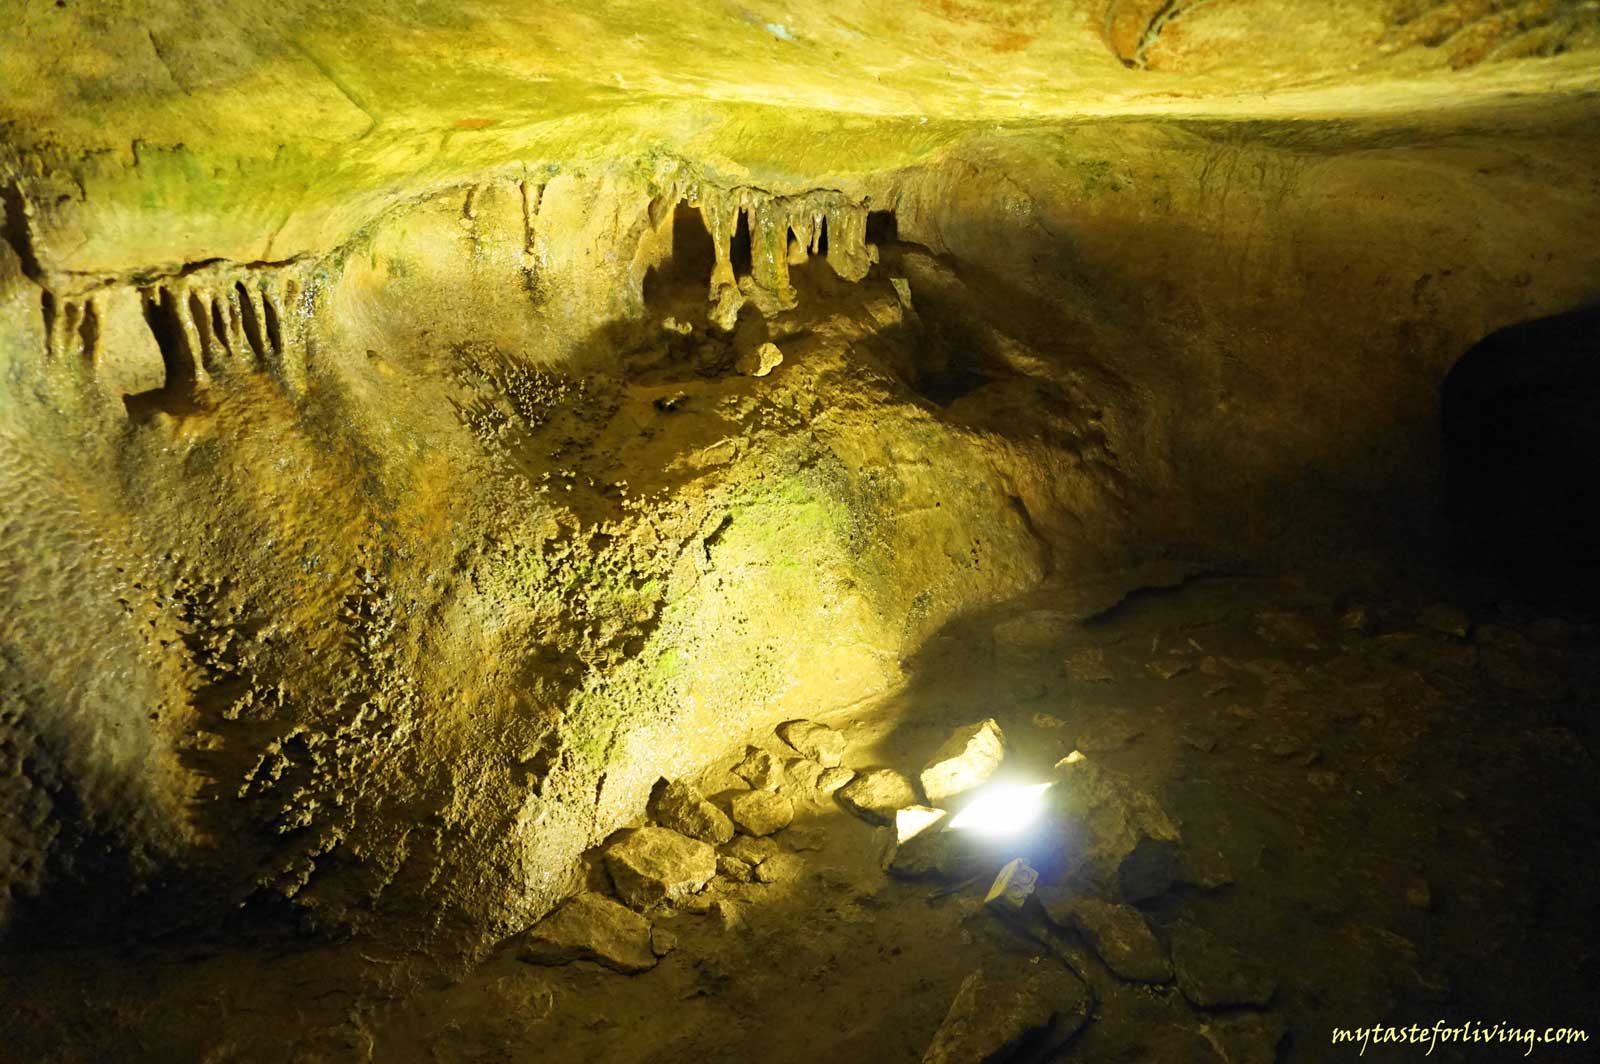 Orlova chuka cave is located about 40 km from Ruse, Bulgaria, in the Rusenski Lom nature park, near the village of Pepelina, on the left slope of the Cherni Lom river. Declared a natural landmark and archeological cultural monument of national importance, today it is the second largest cave in Bulgaria.